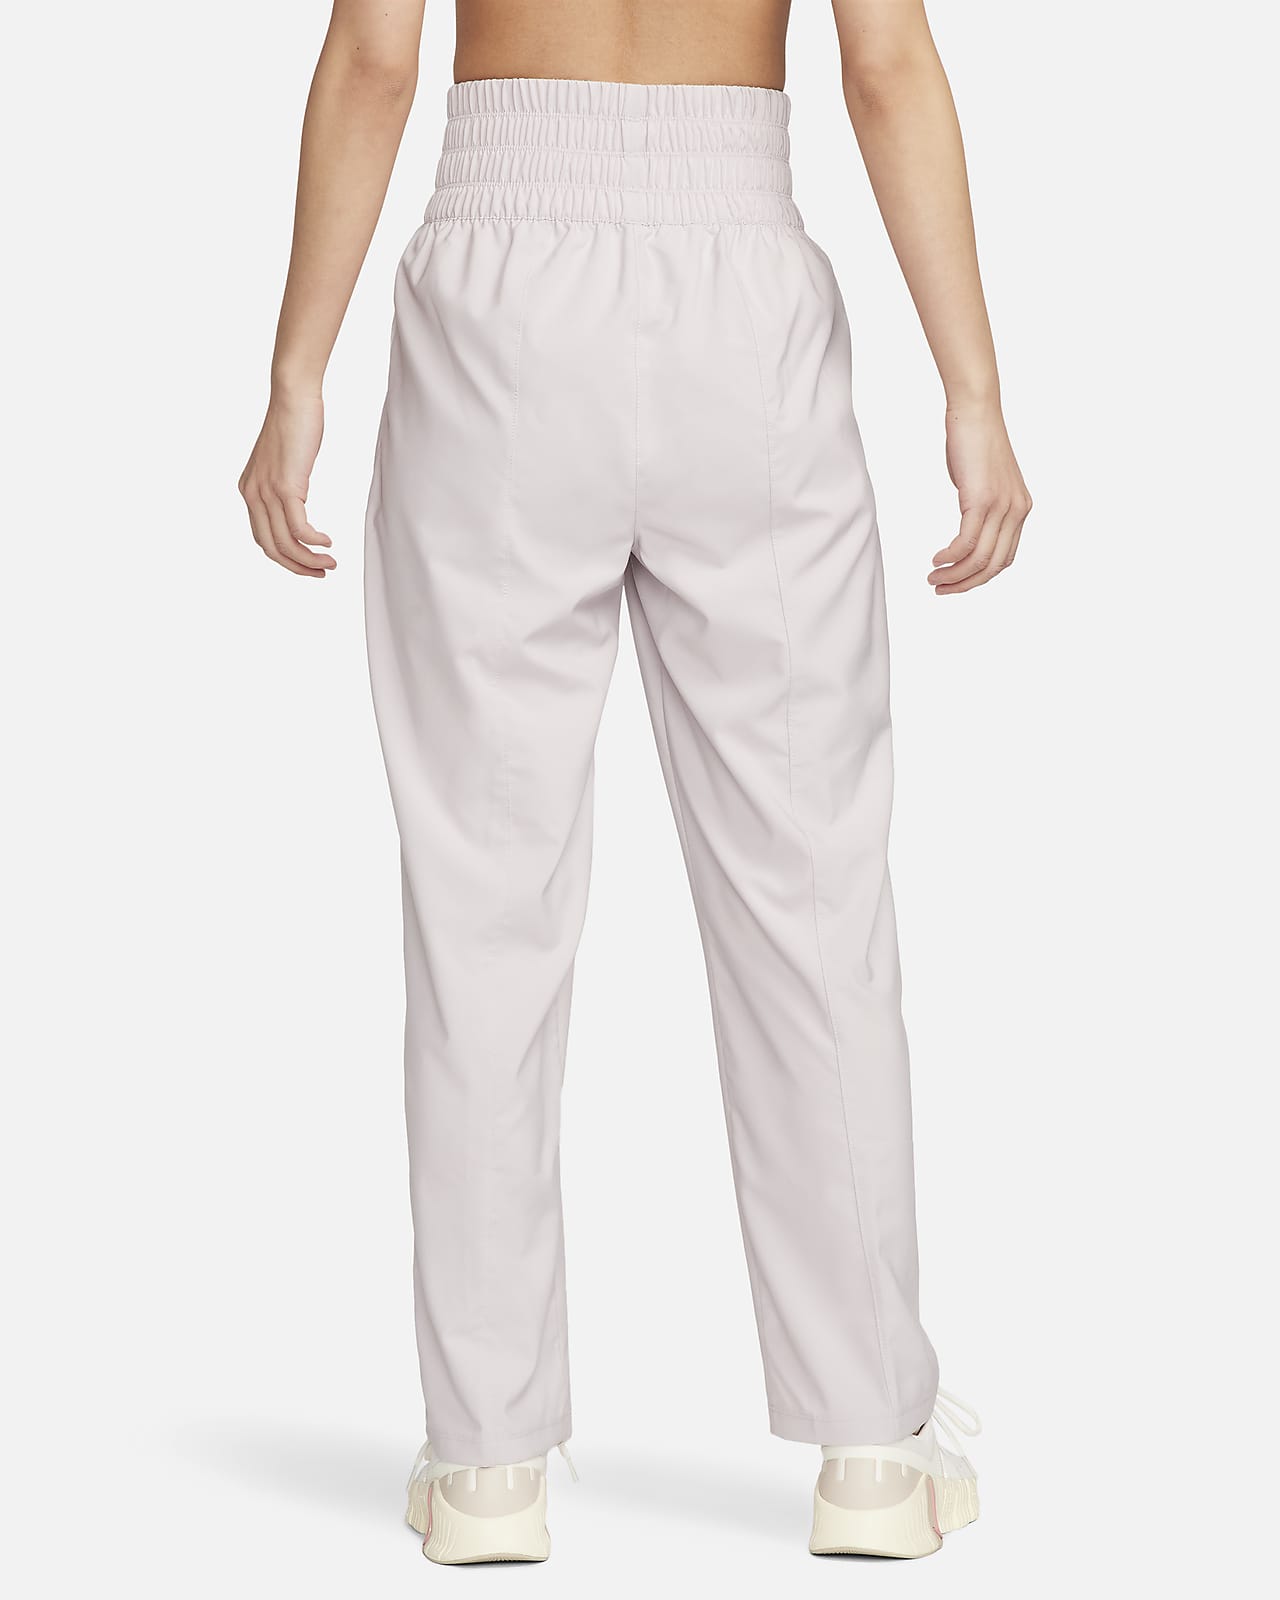 Bossin' Up Petite High Waisted Tailored Flare Leg Trousers in Ivory | Oh  Polly